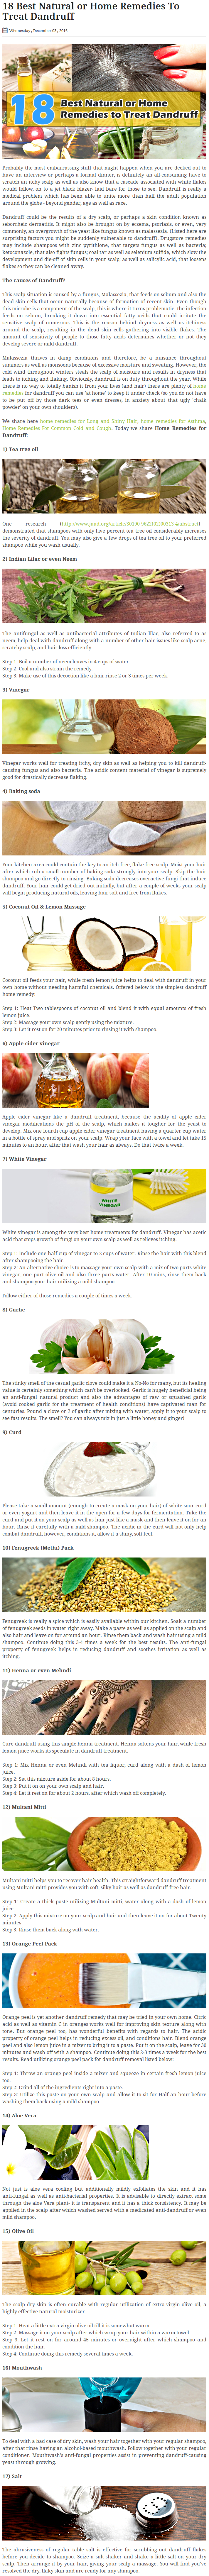 18-best-natural-or-home-remedies-to-treat-dandruff